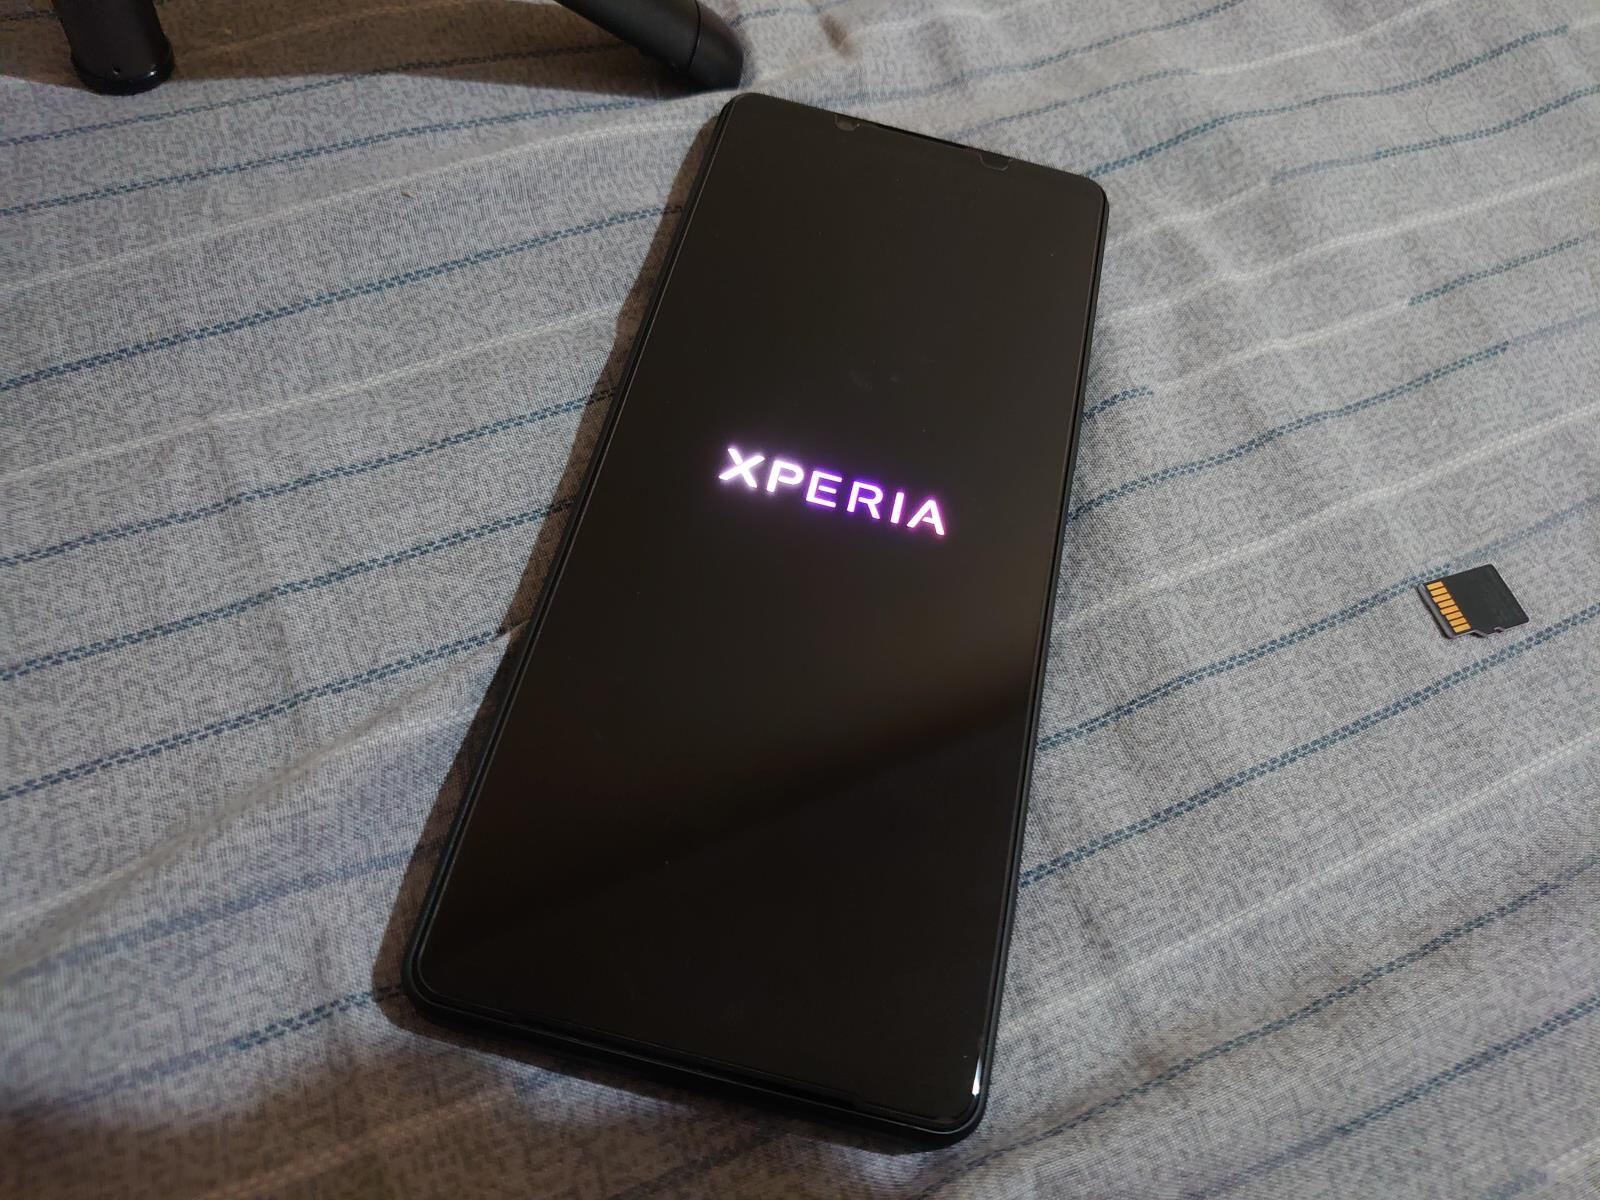 initiating-recovery-mode-reboot-on-sony-xperia-step-by-step